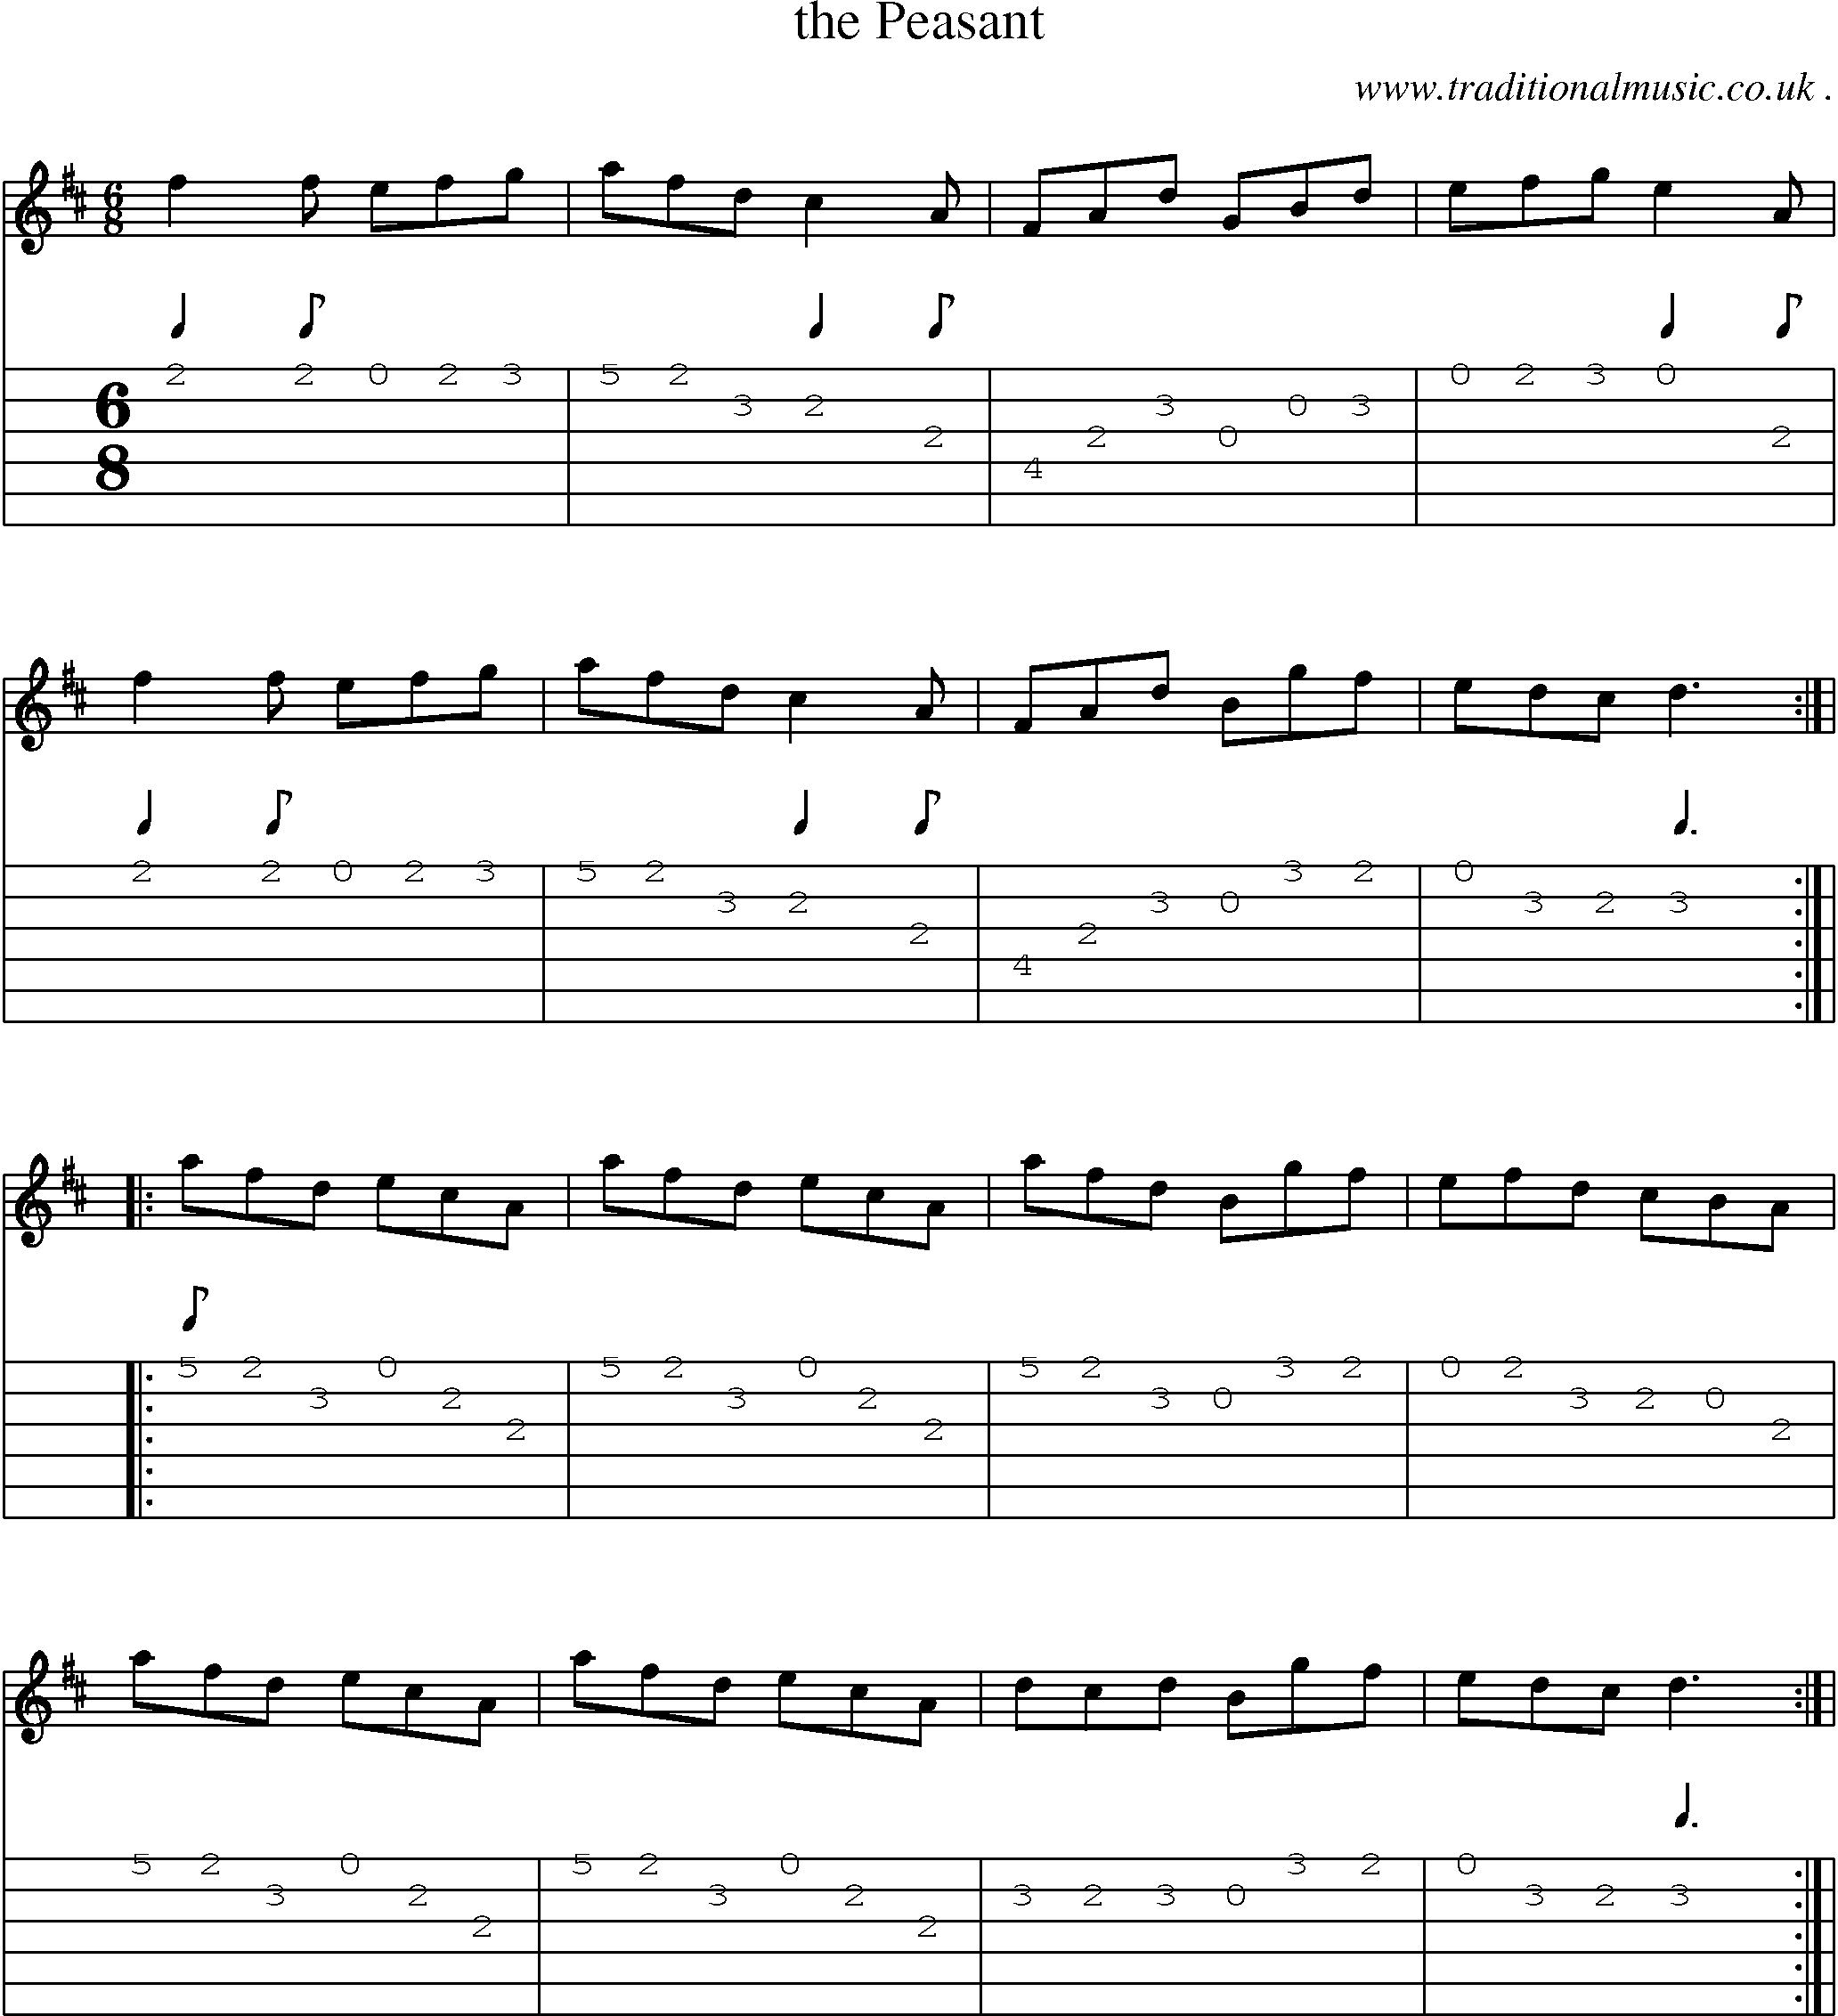 Sheet-Music and Guitar Tabs for The Peasant